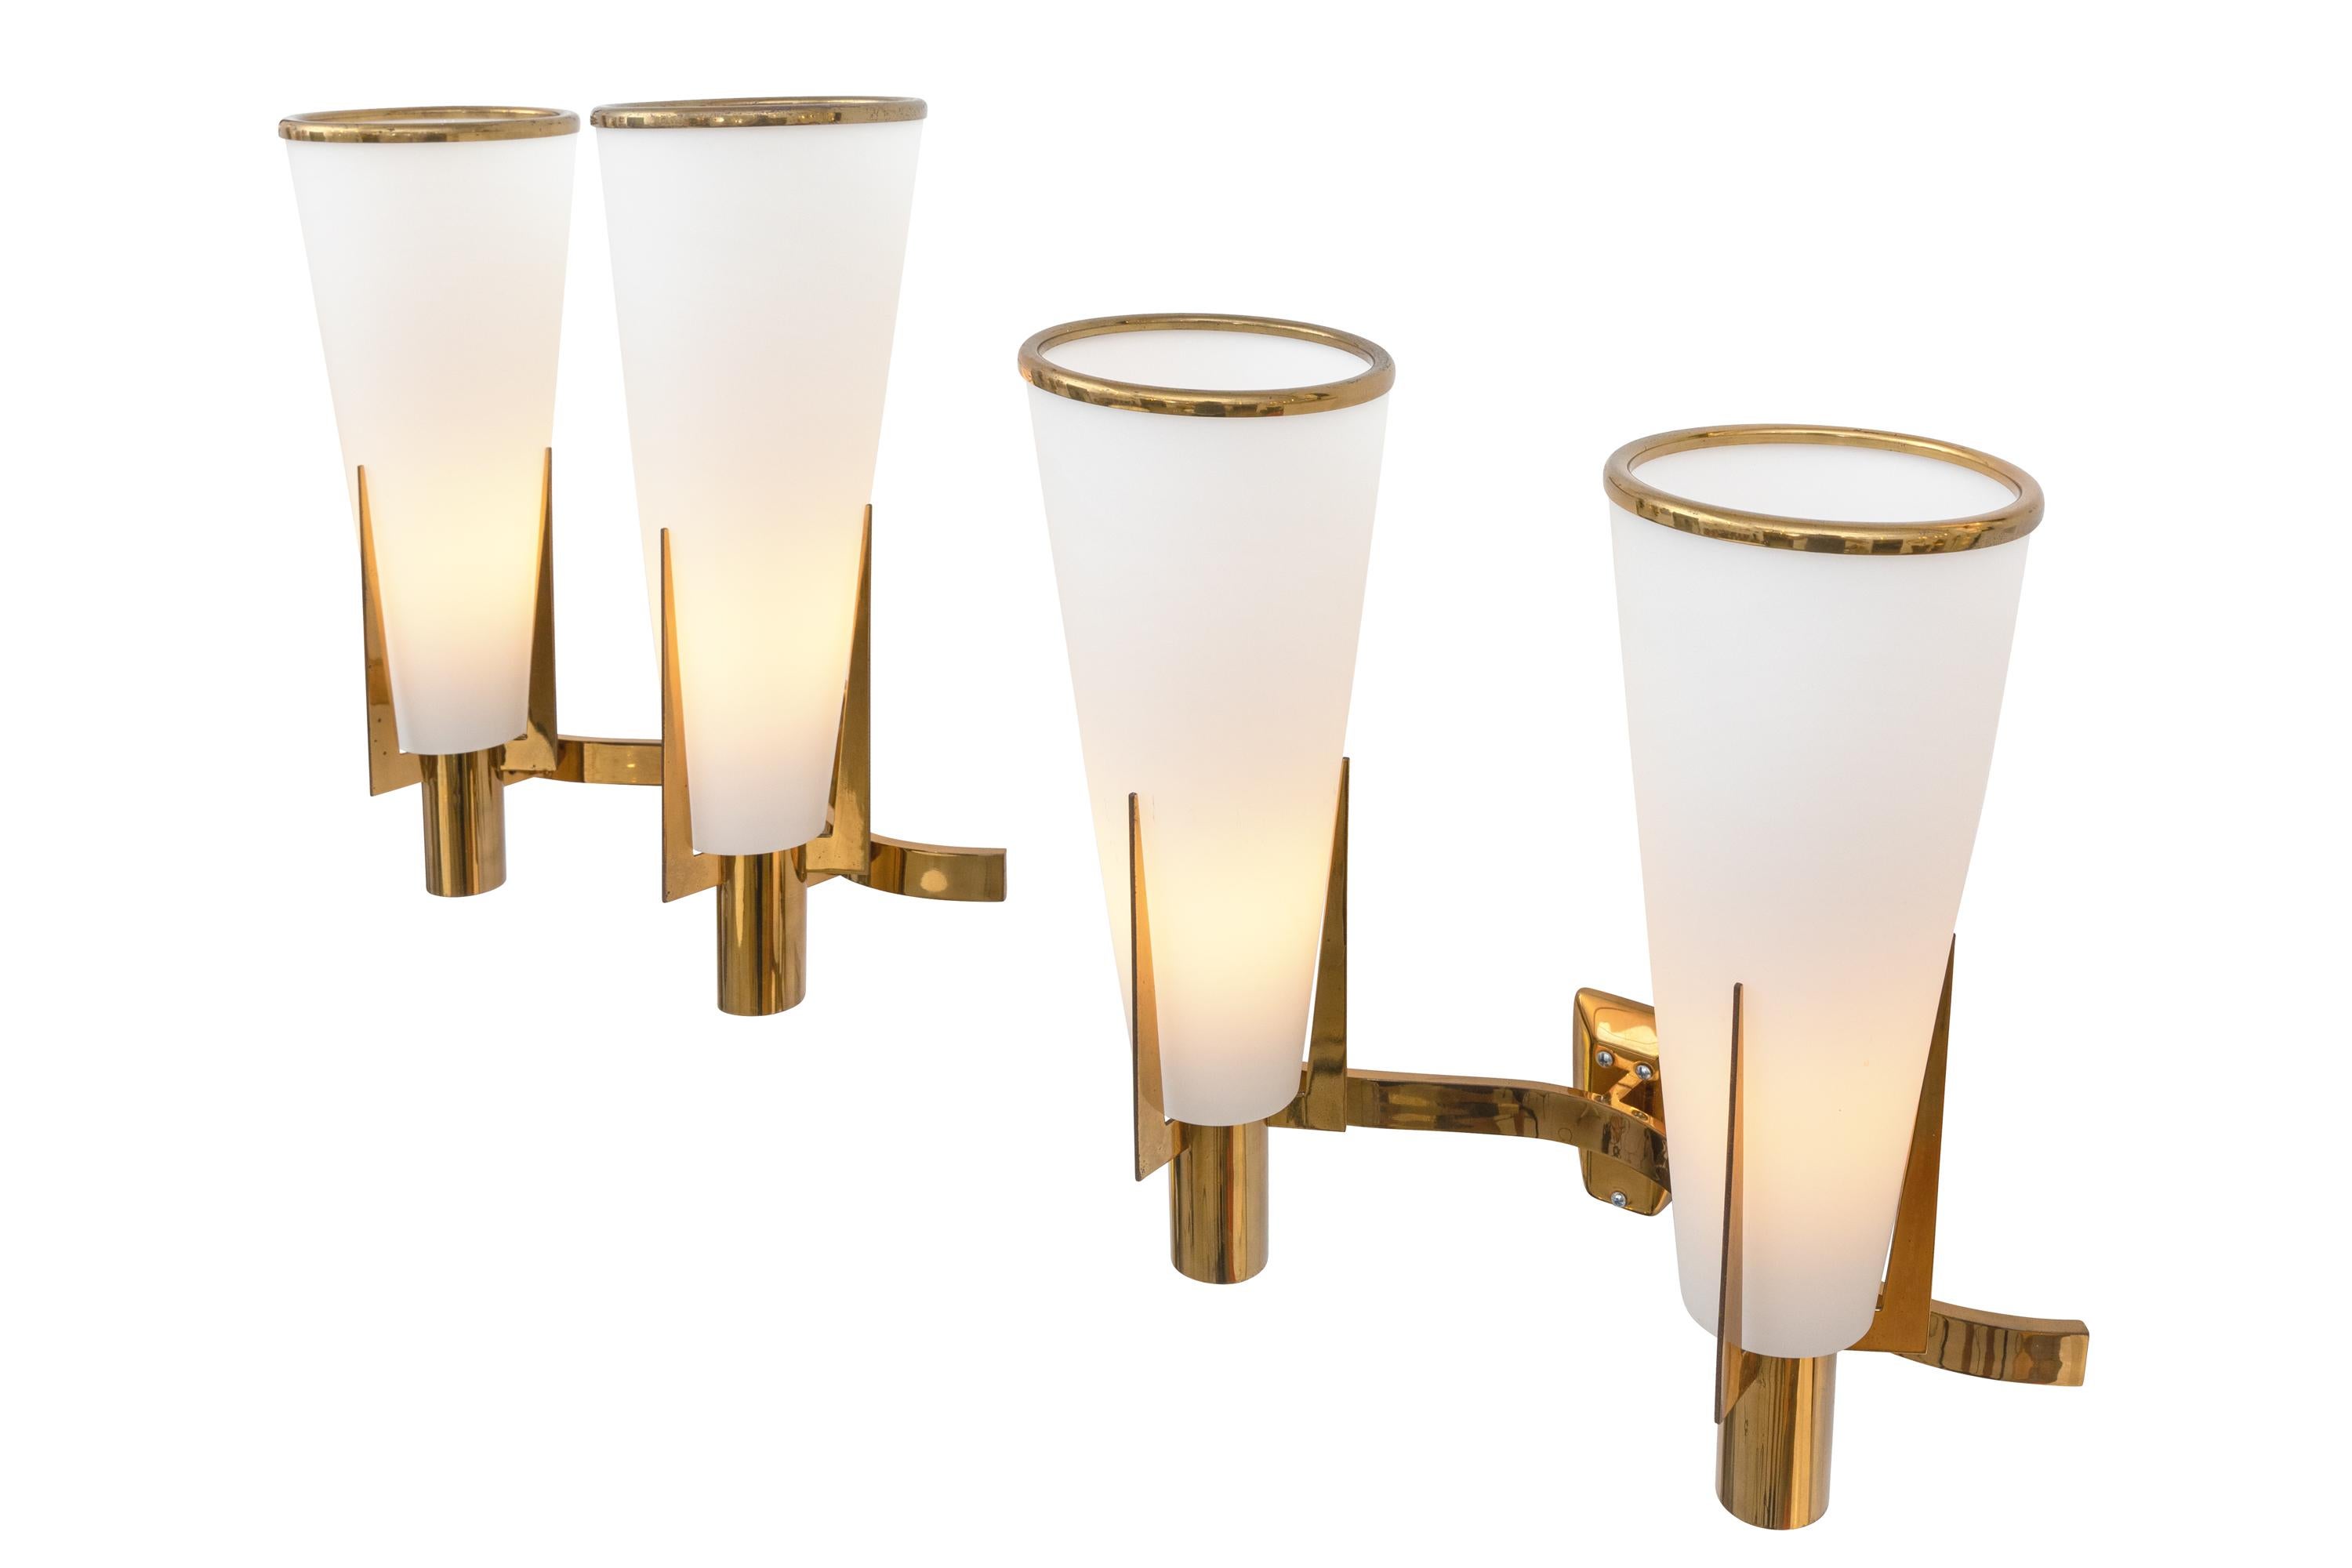 A simply elegant design and an impressive scale make these sconces a rare find, particularly in the two shade model. In original condition including the brass ring at the top of the tapered glass shade.